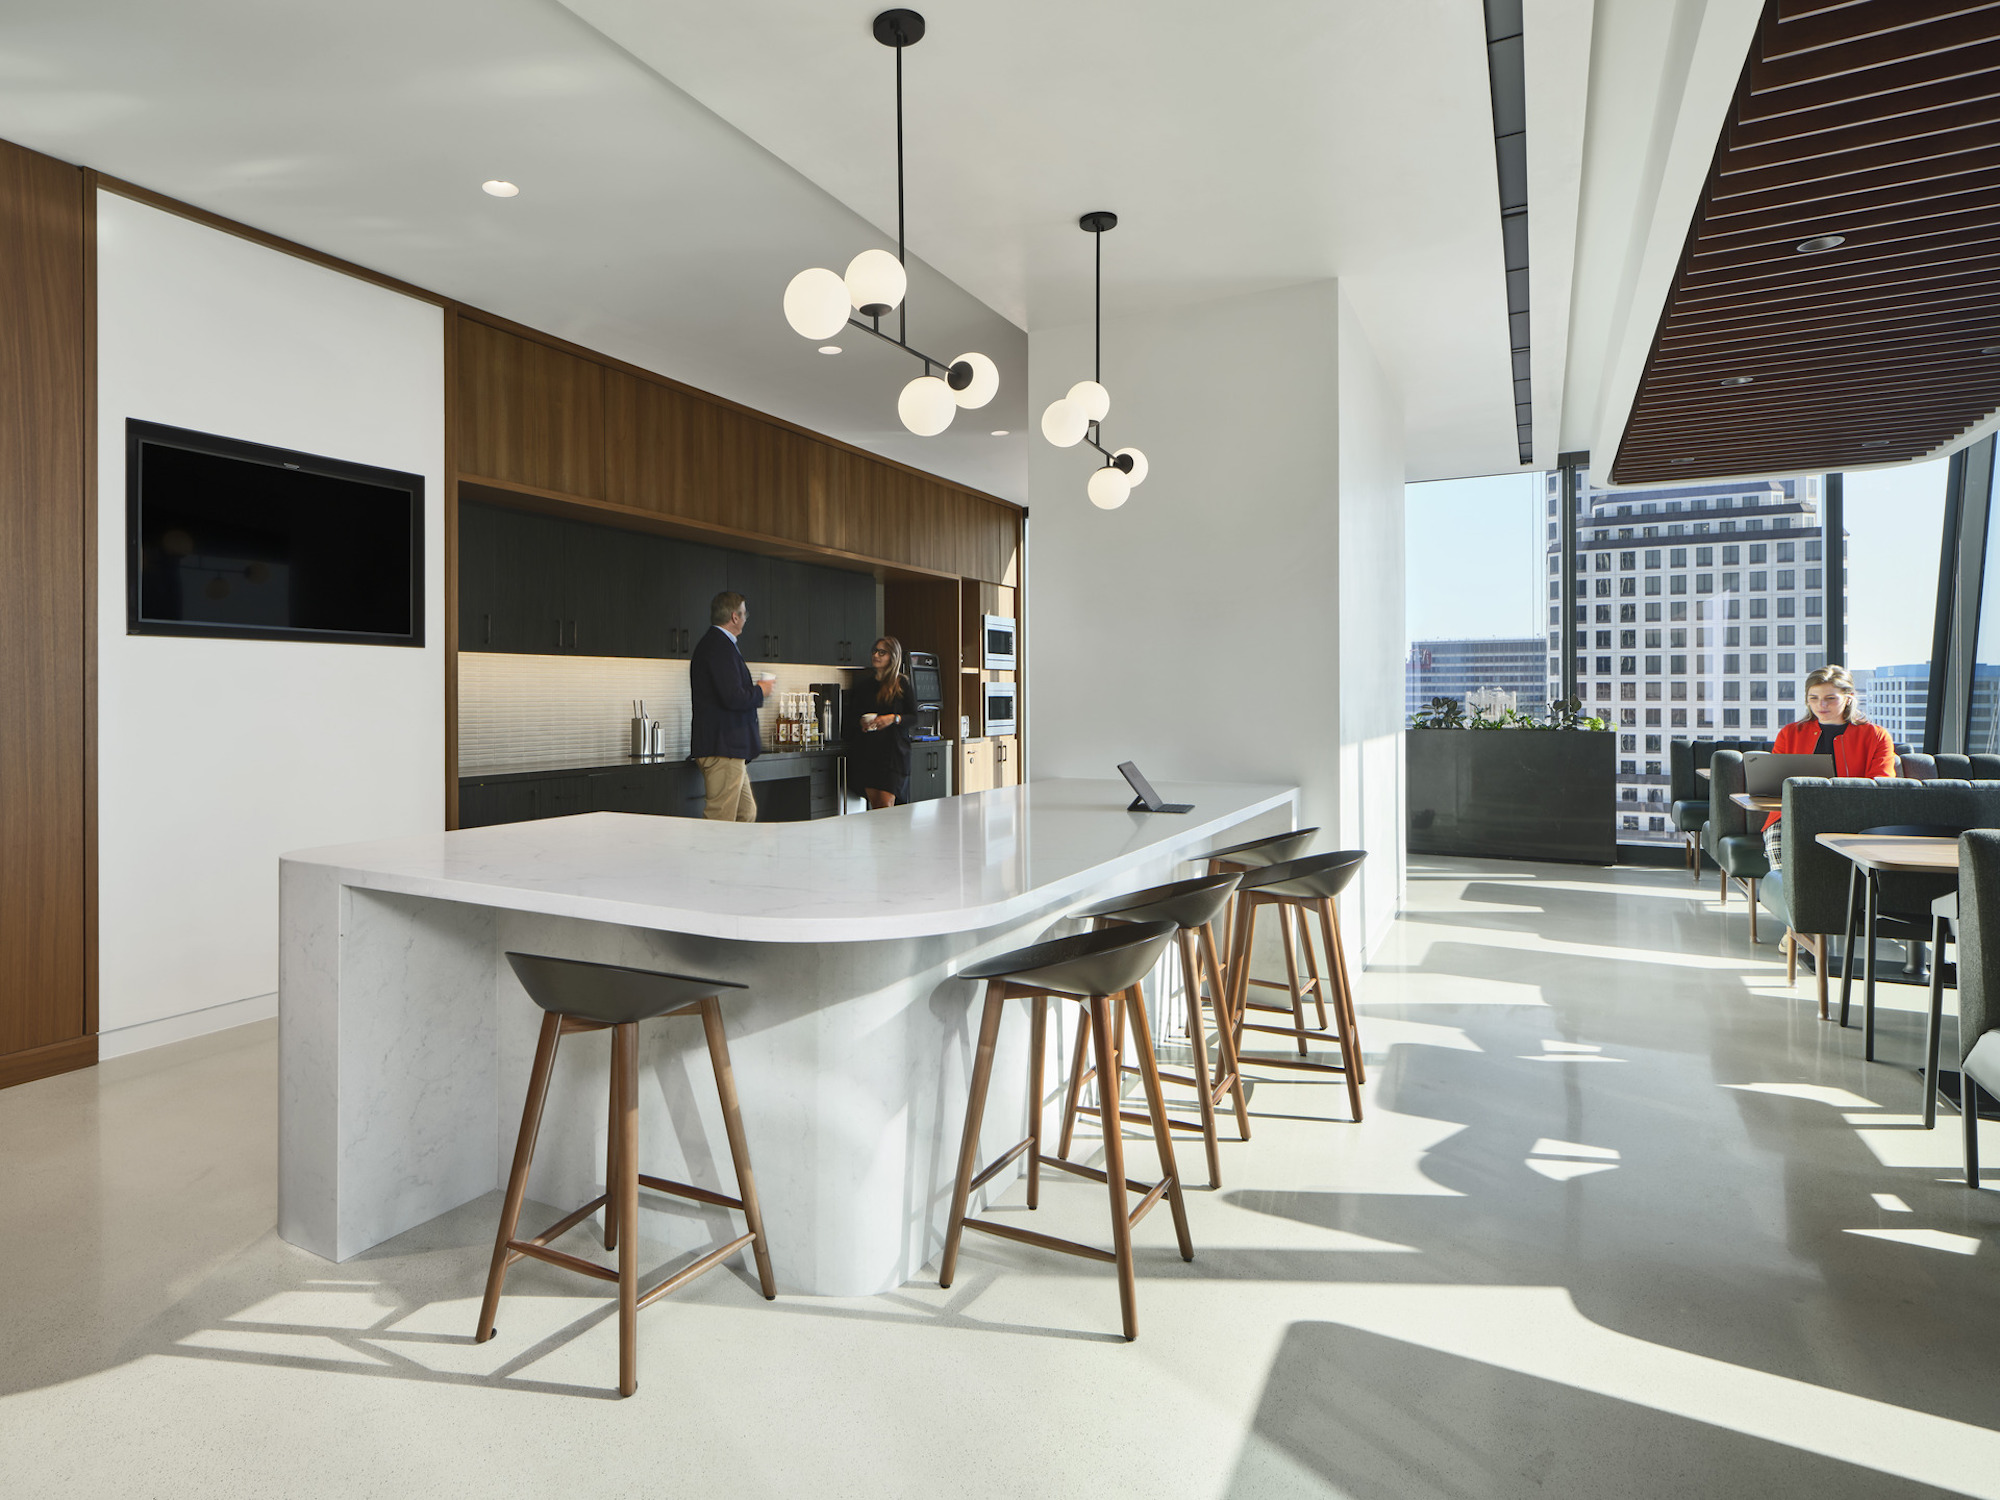 For Perkins Coie’s new Austin office, Perkins&Will replaced the traditional assigned office model with alternative work areas and meeting spaces.